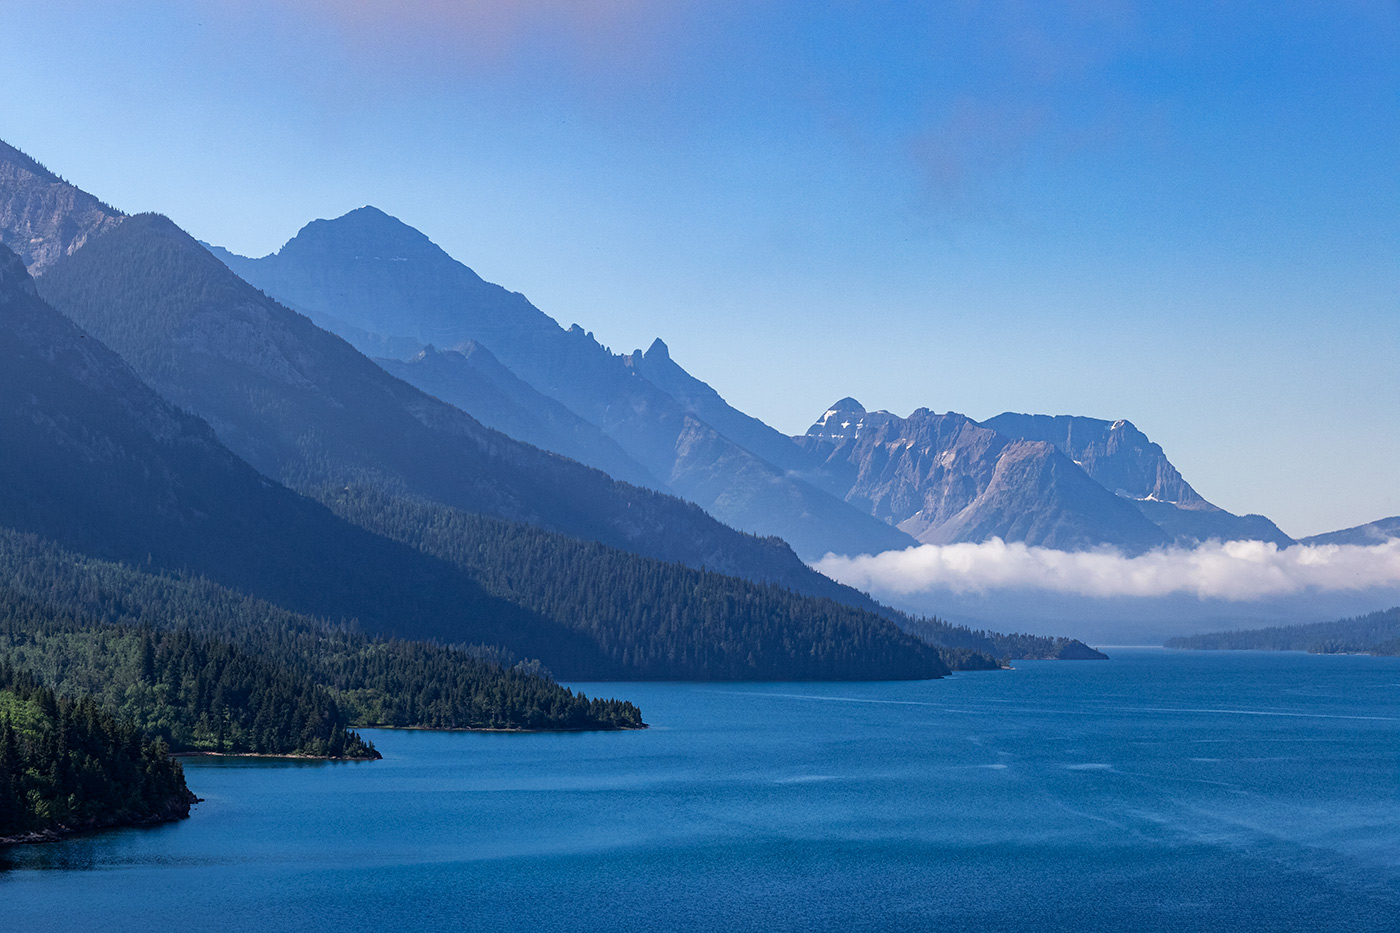 Upper Waterton Lake with the International boundary and Montana in the distance.